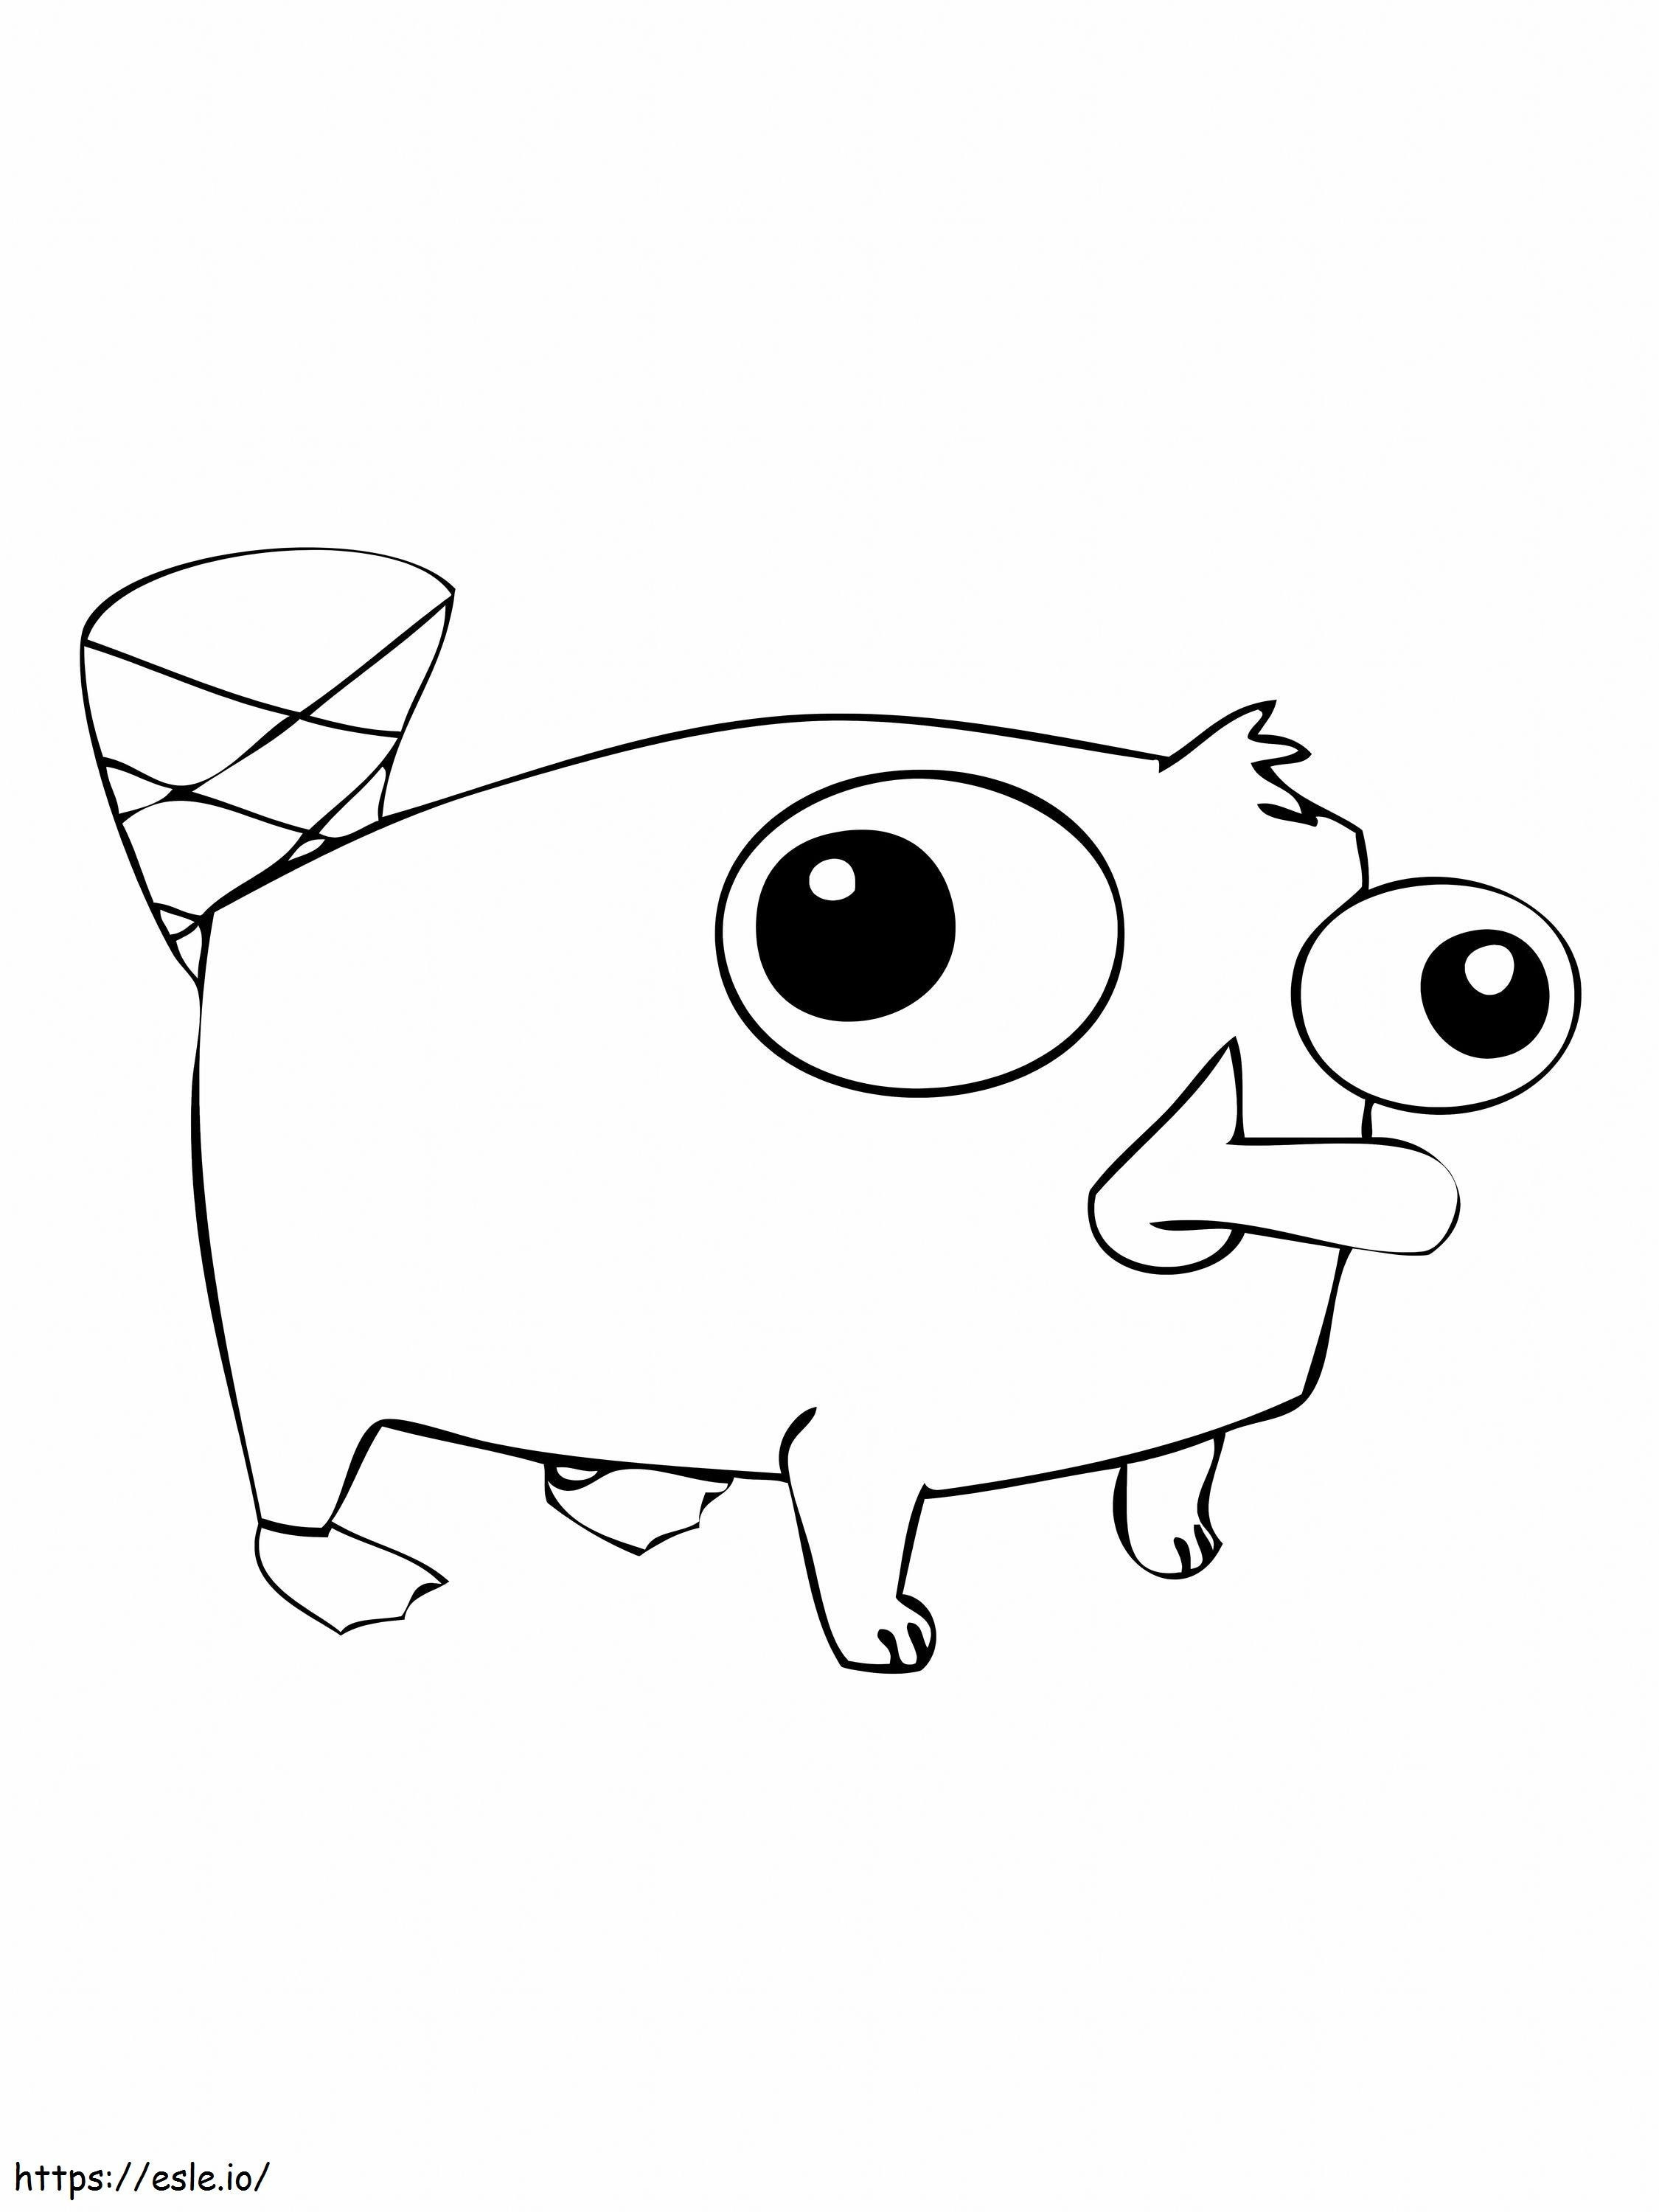 1559699178_Cute Perry A4 coloring page